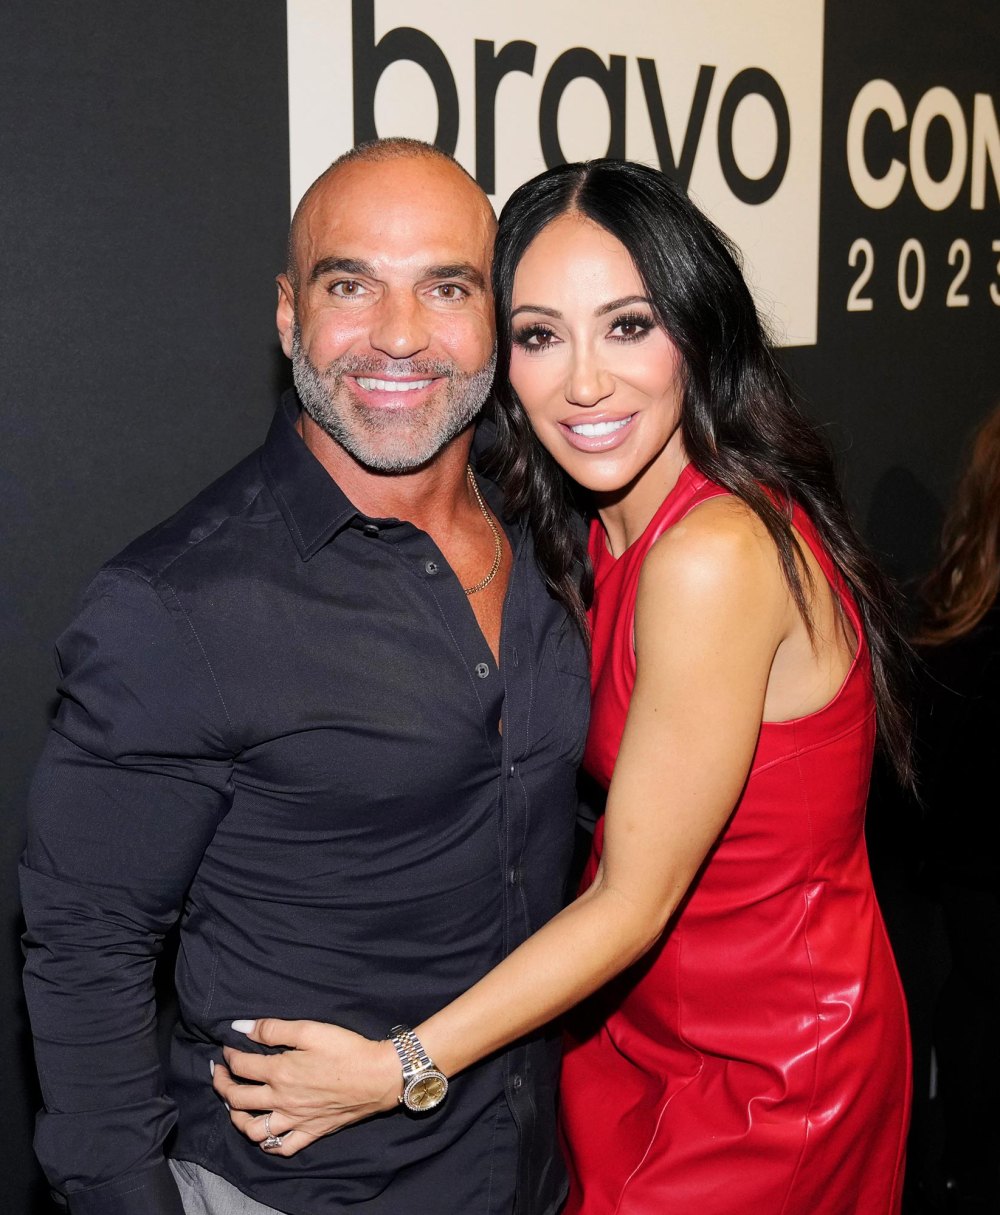 RHONJ s Teresa Giudice Says the Chapter Is Closed With Joe and Melissa Gorga After Feud 199